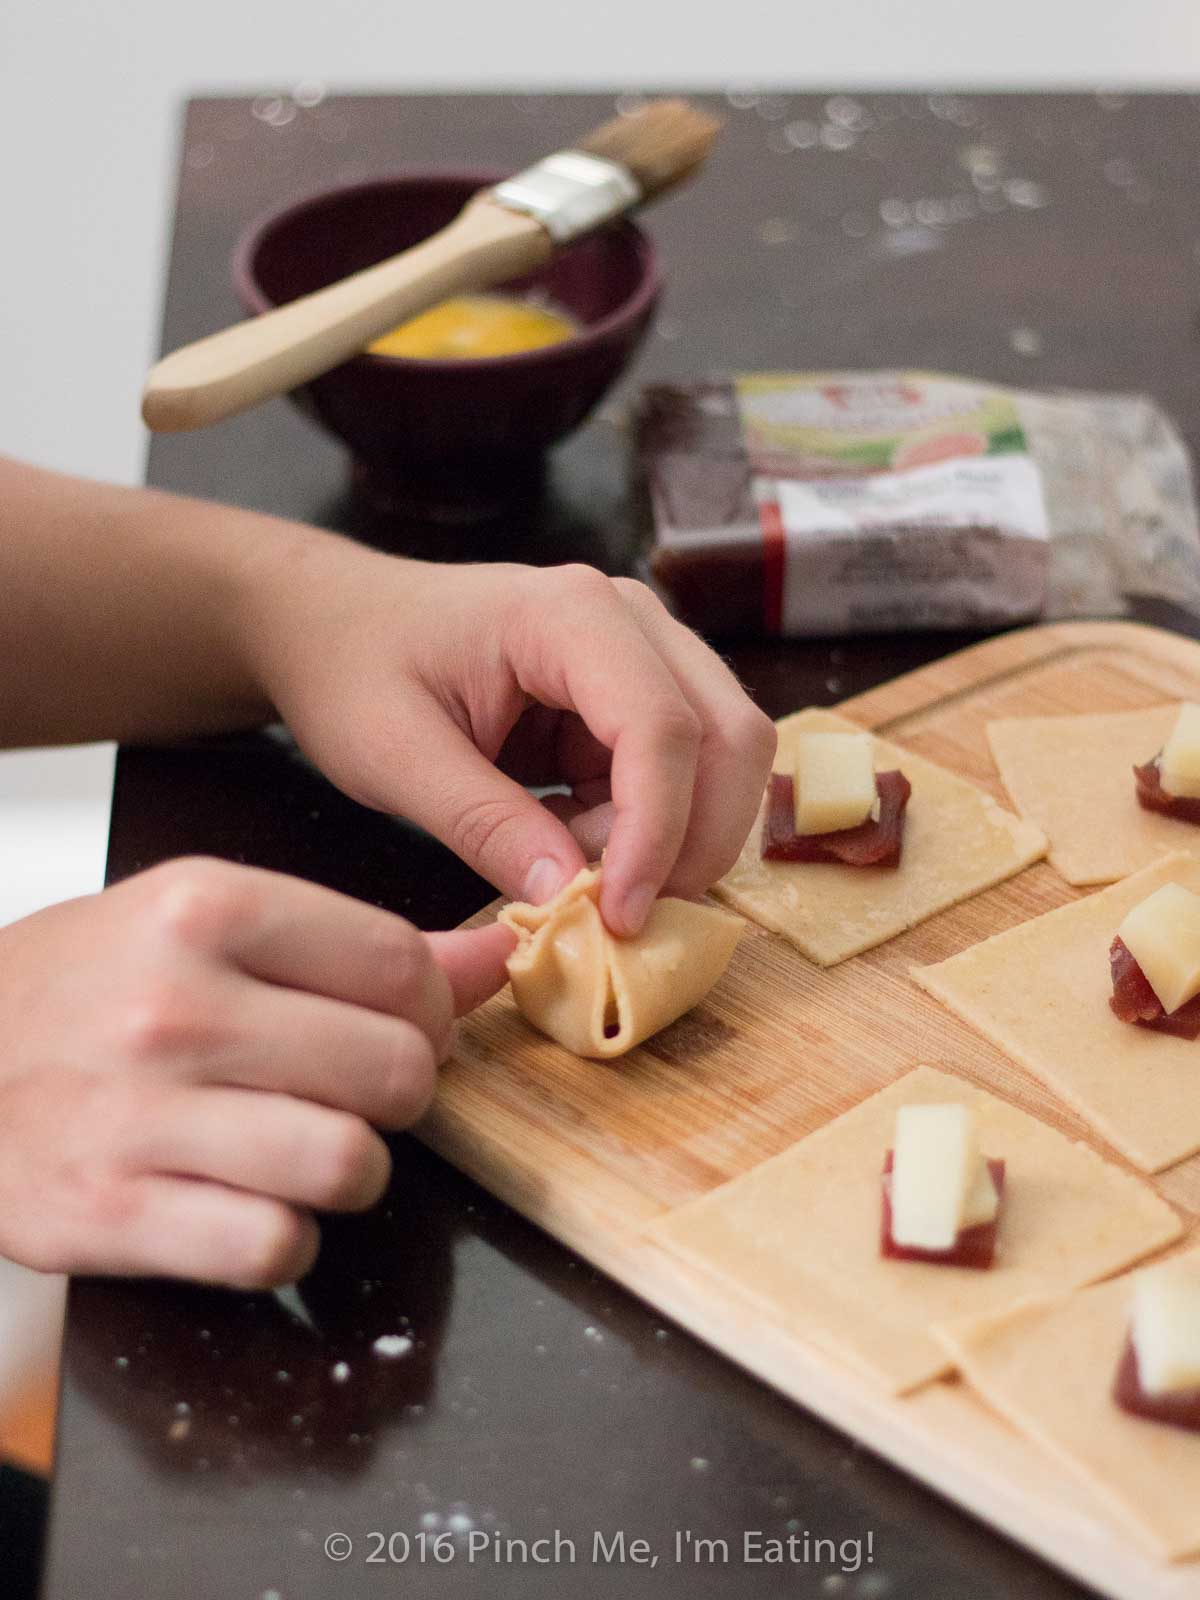 Hands pinching together corners of small pastry squares into a dumpling shape.